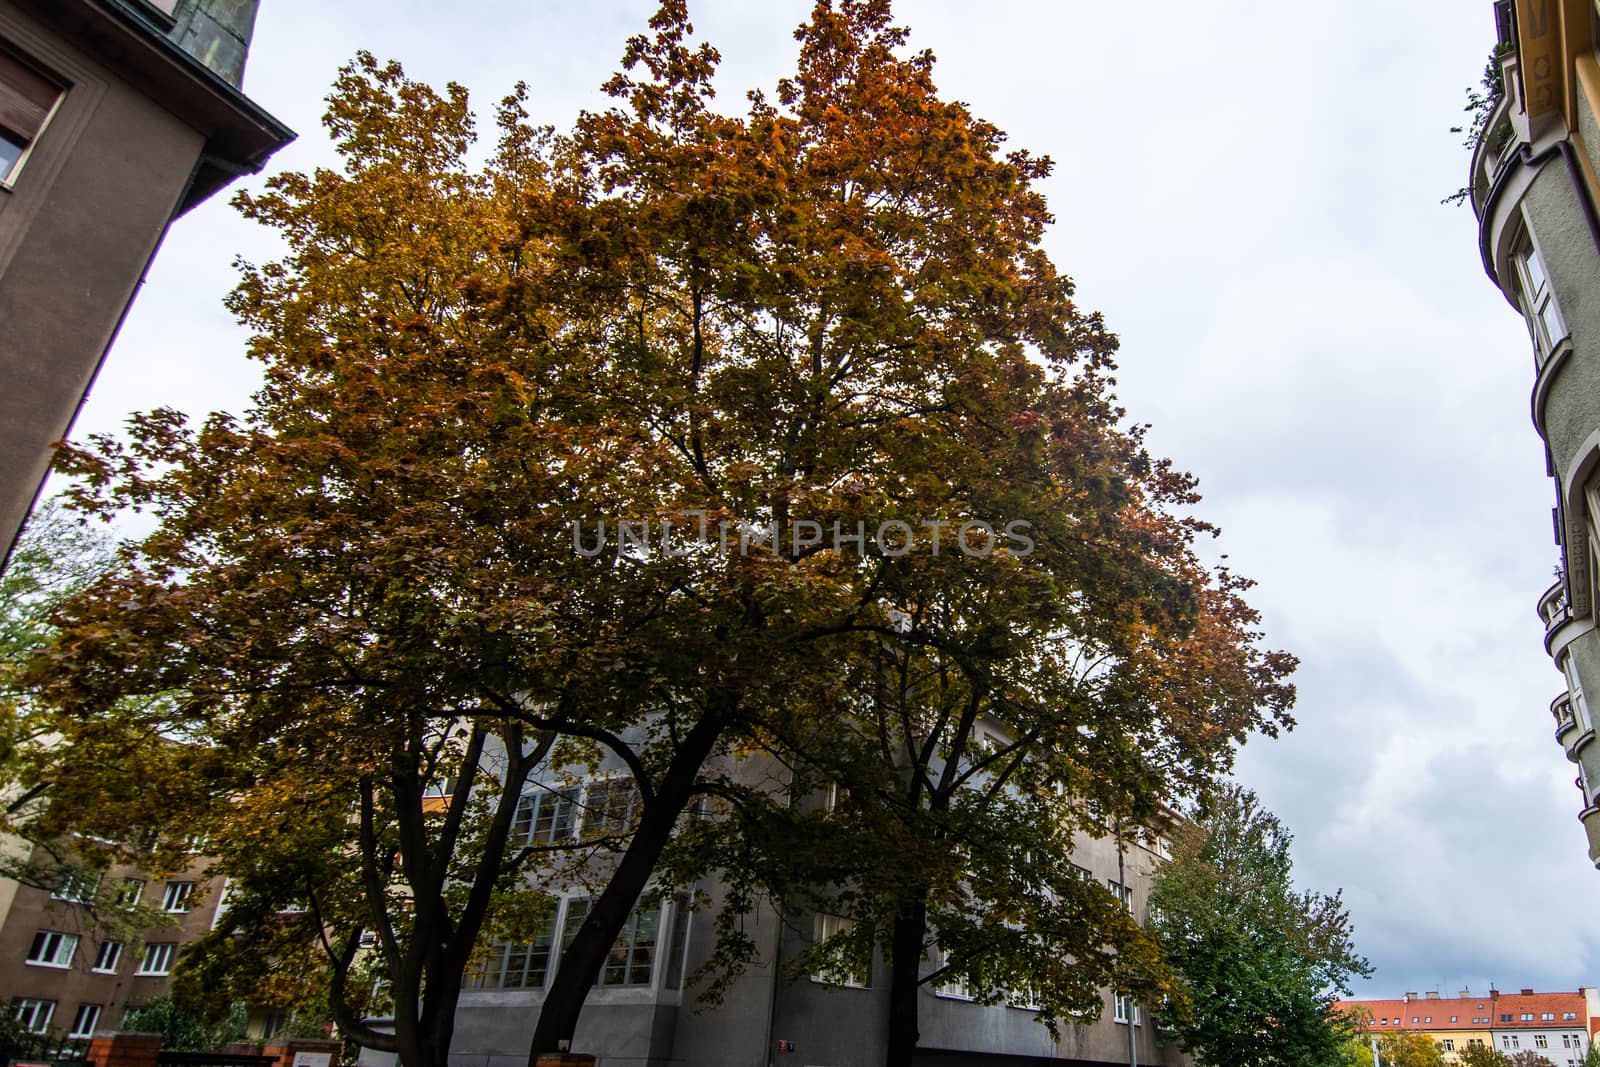 The foliage of a tree in the city on a stormy autumn day